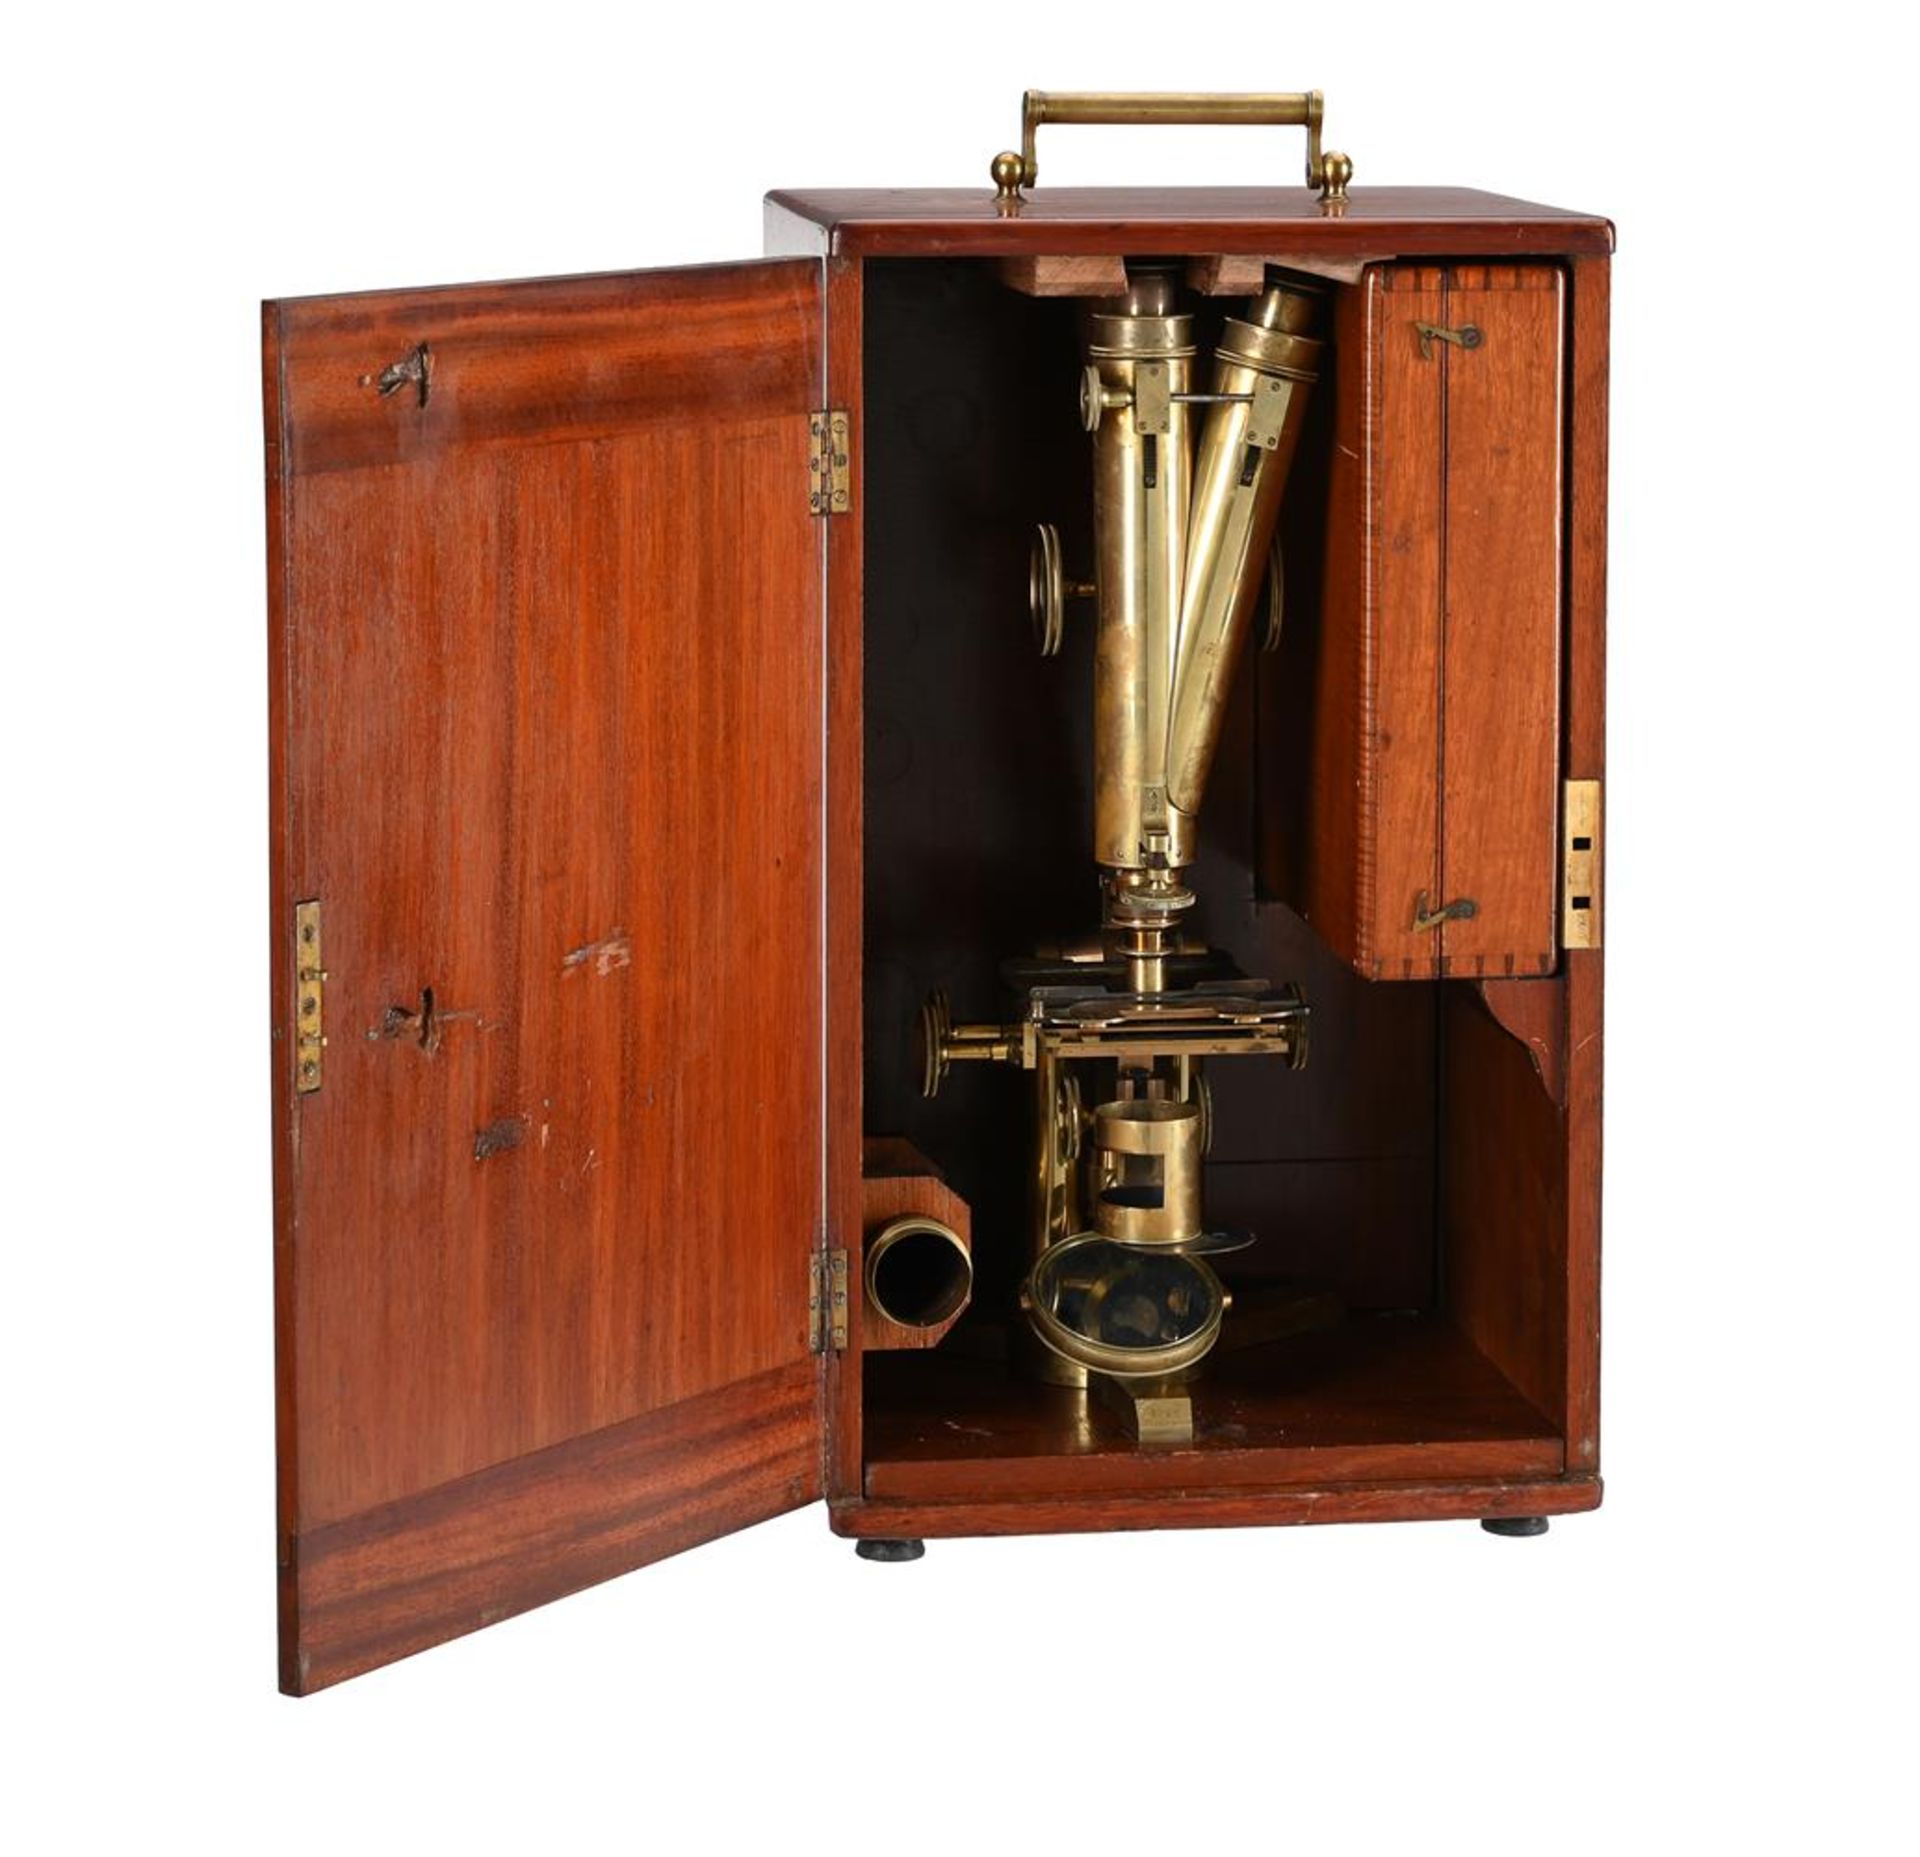 A VICTORIAN LACQUERED BRASS BINOCULAR MICROSCOPE - Image 6 of 6